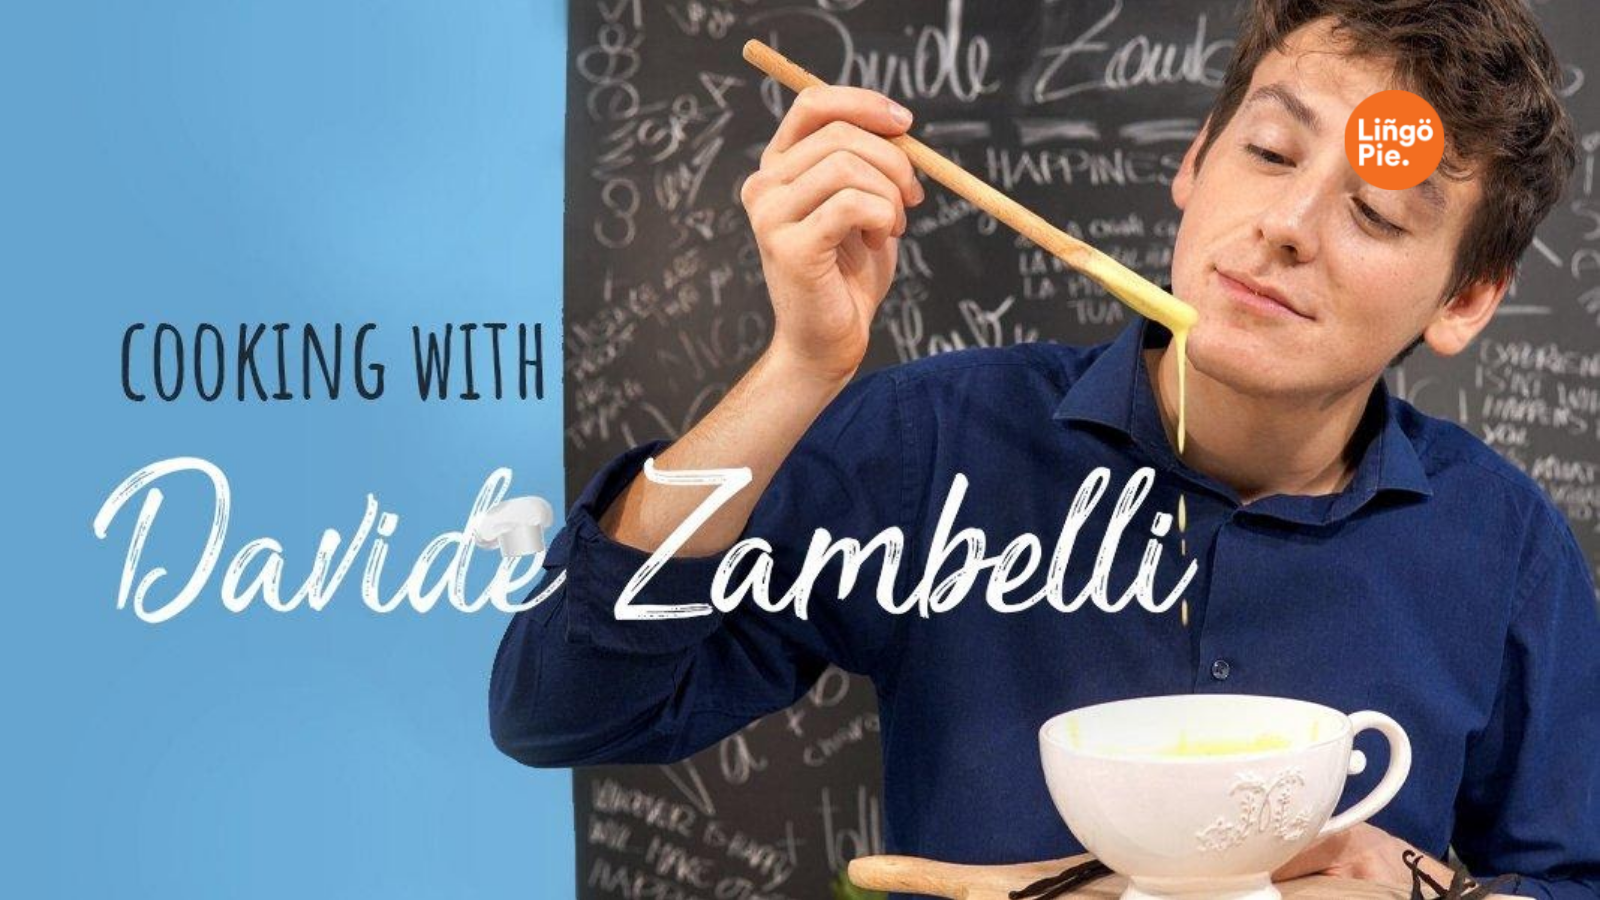 Cooking with Davide Zambelli on Lingopie.